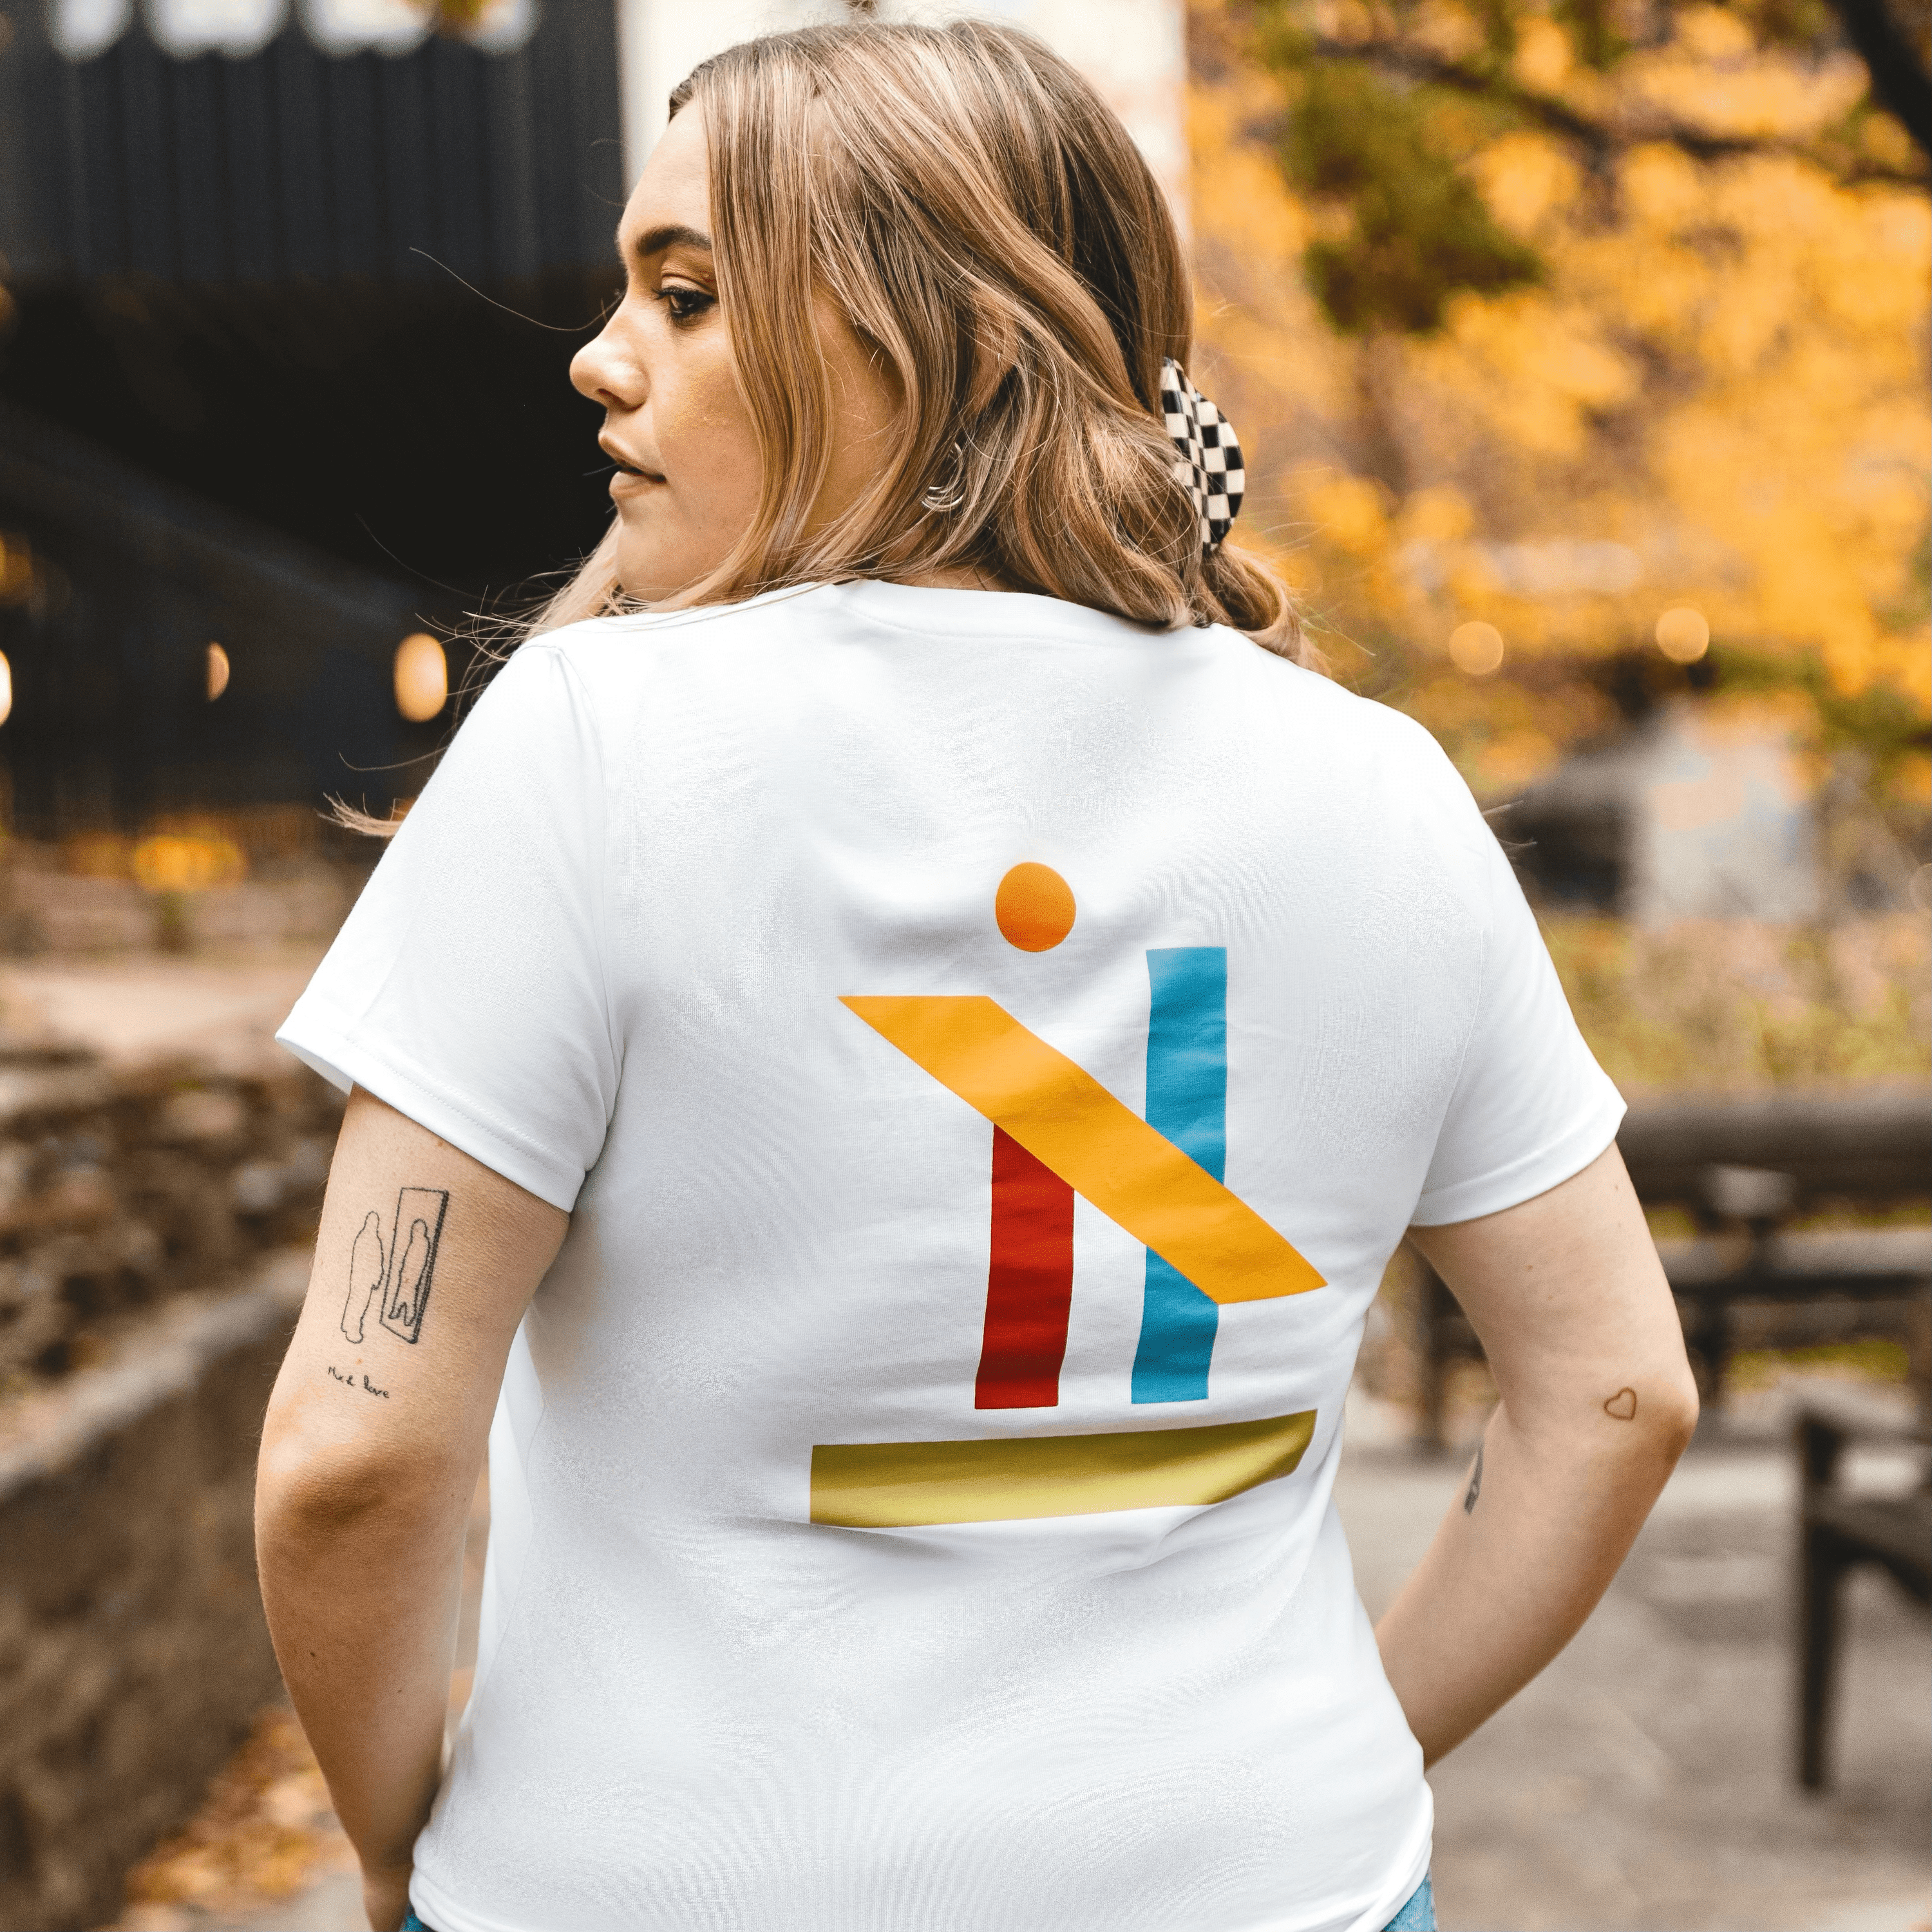 h clothing - female model with back to camera wearing white tshirt with graphic of colourful geometric shapes